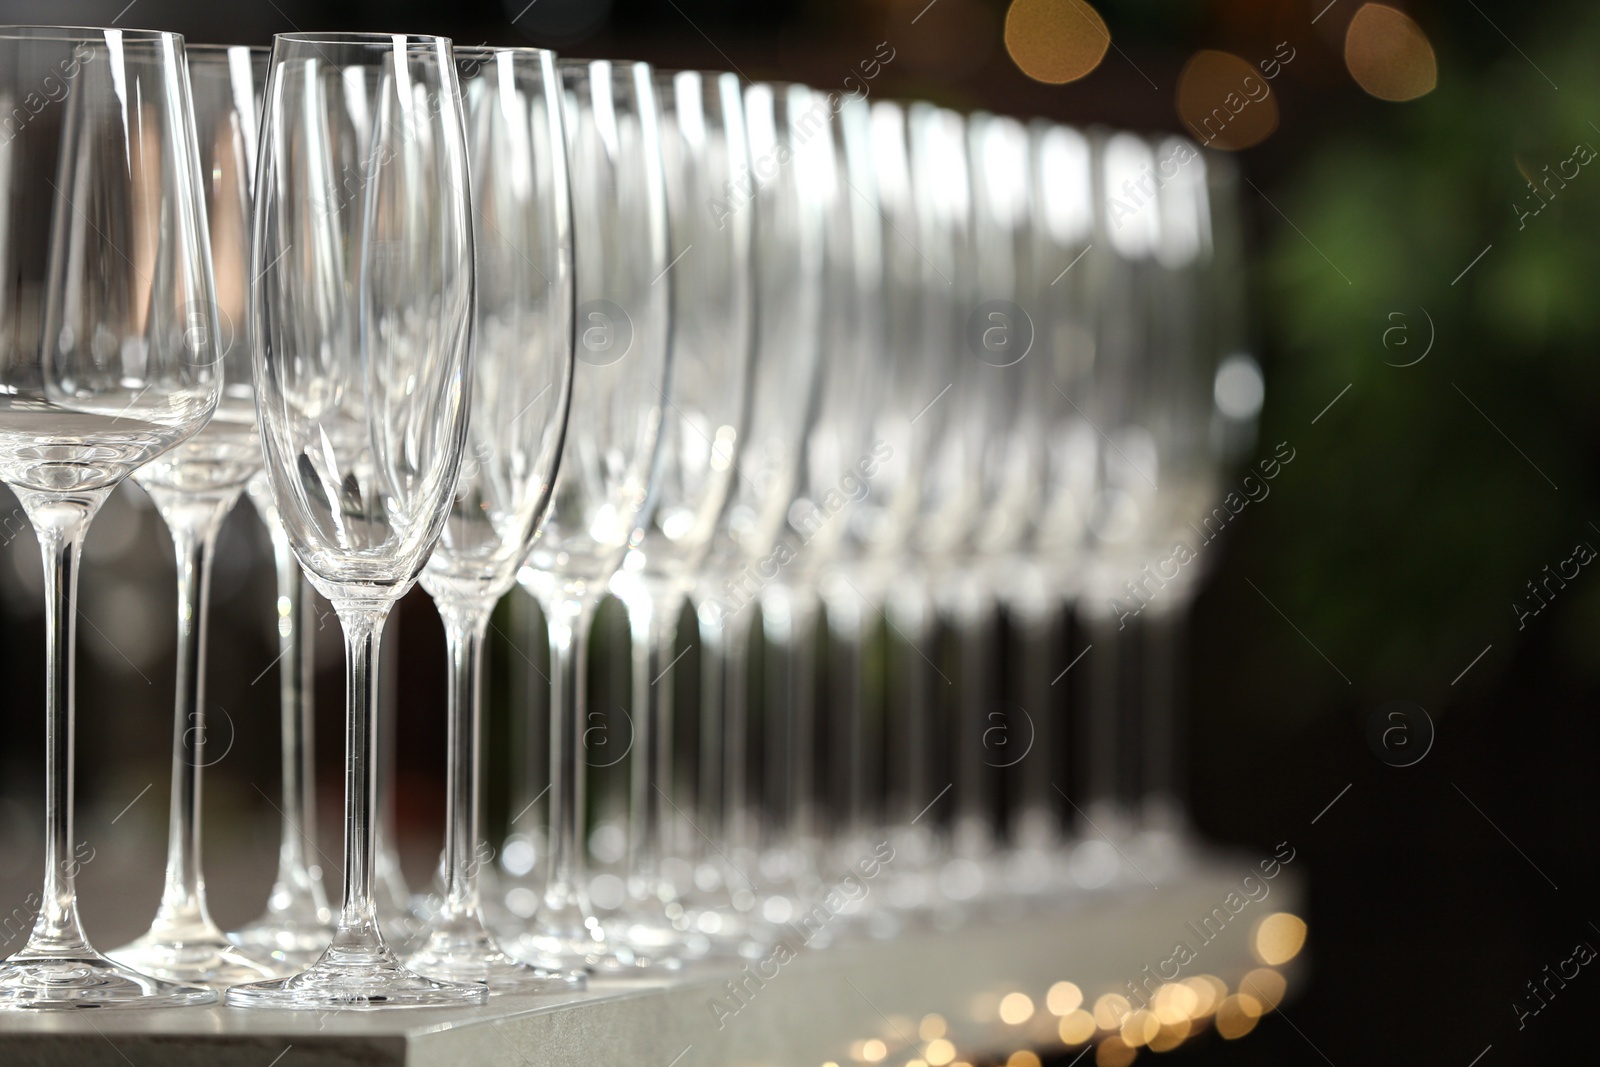 Photo of Set of empty glasses on grey table against blurred background